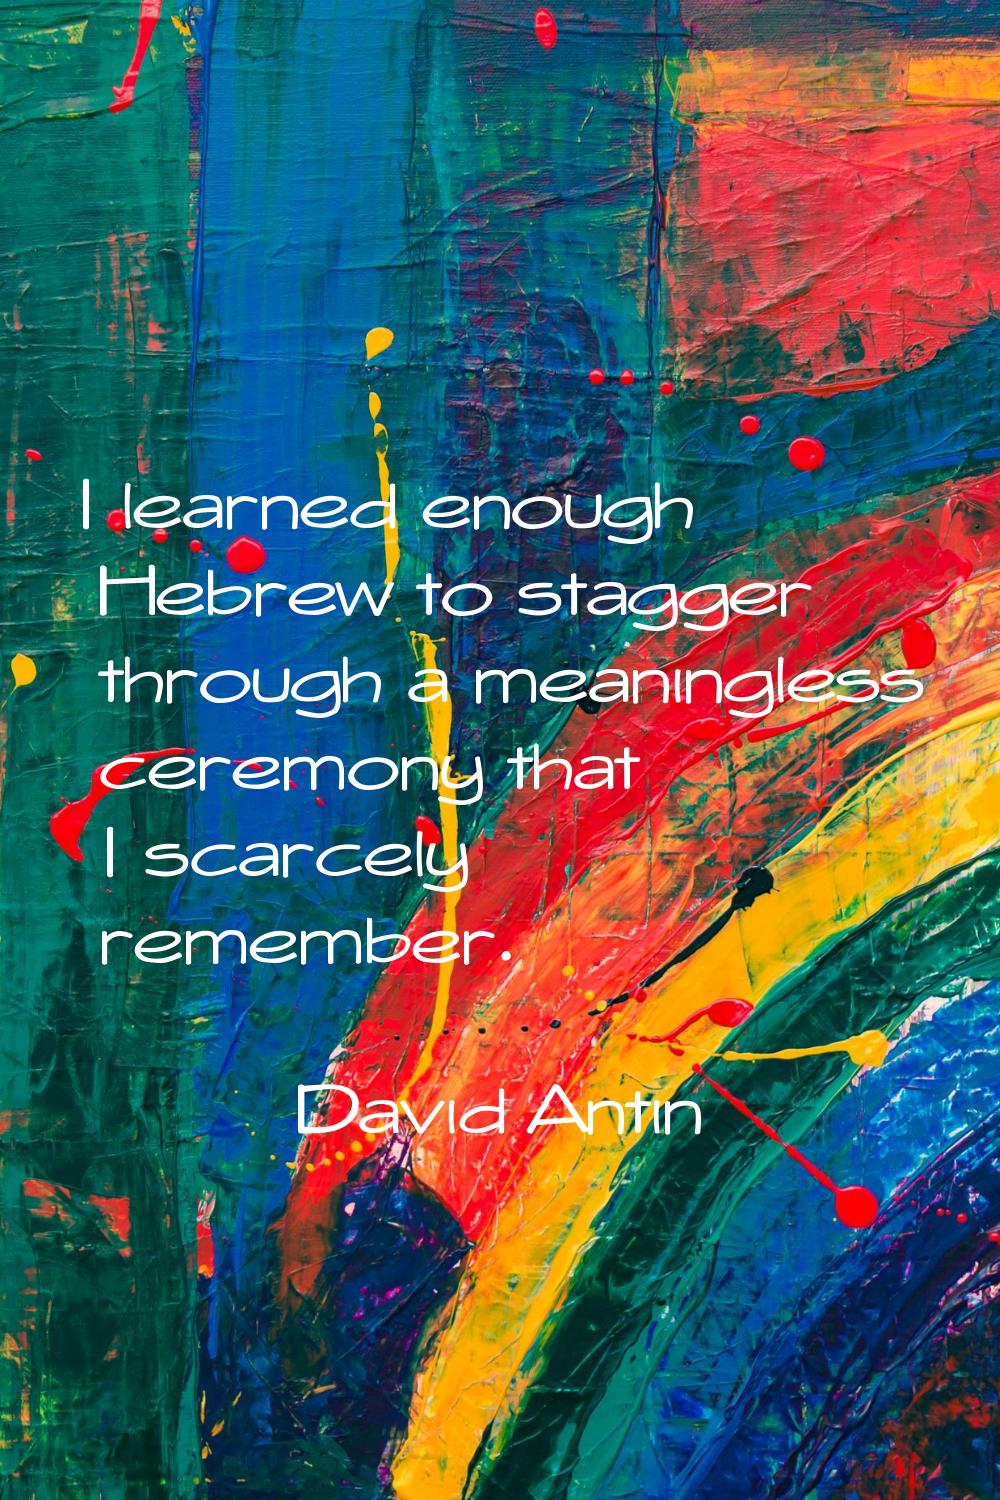 I learned enough Hebrew to stagger through a meaningless ceremony that I scarcely remember.